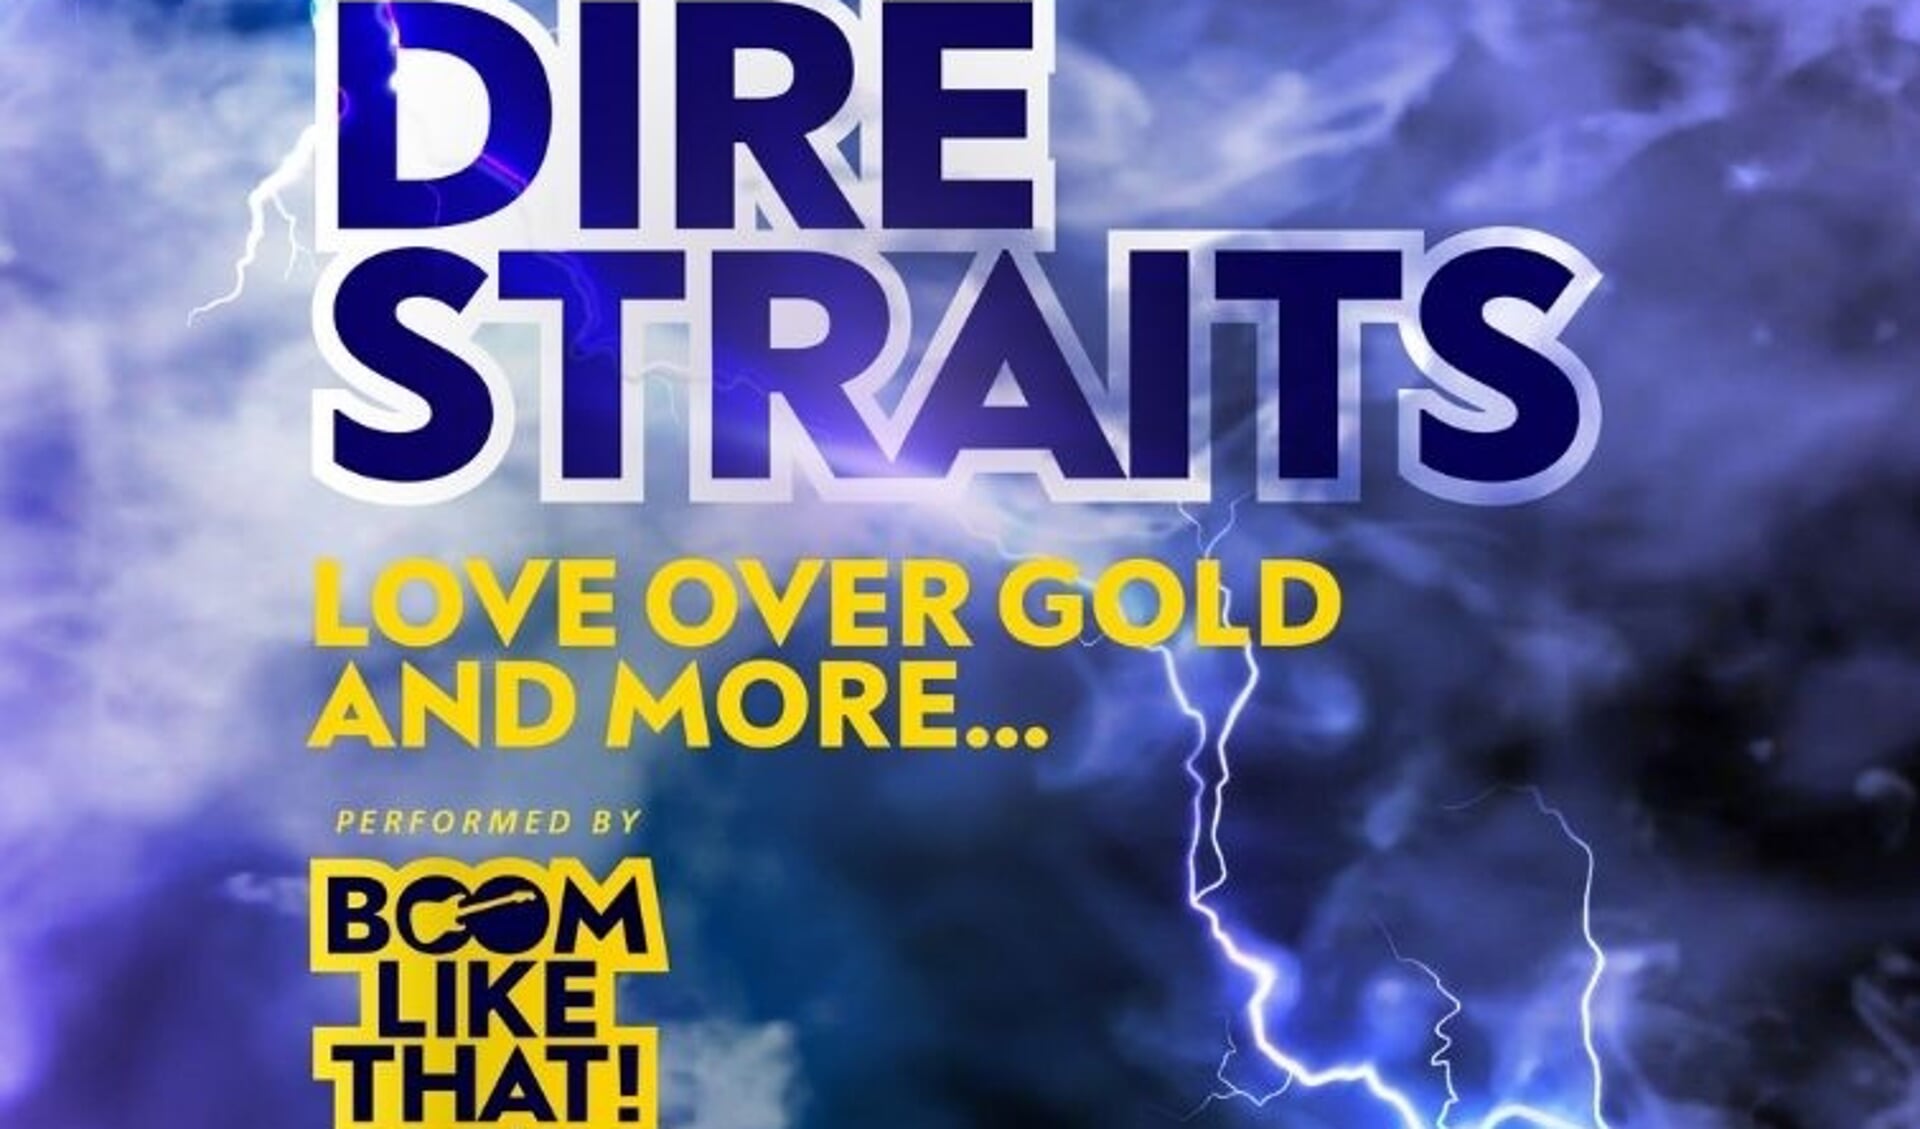 Boom Like That - Dire Straits - Love over Gold and More